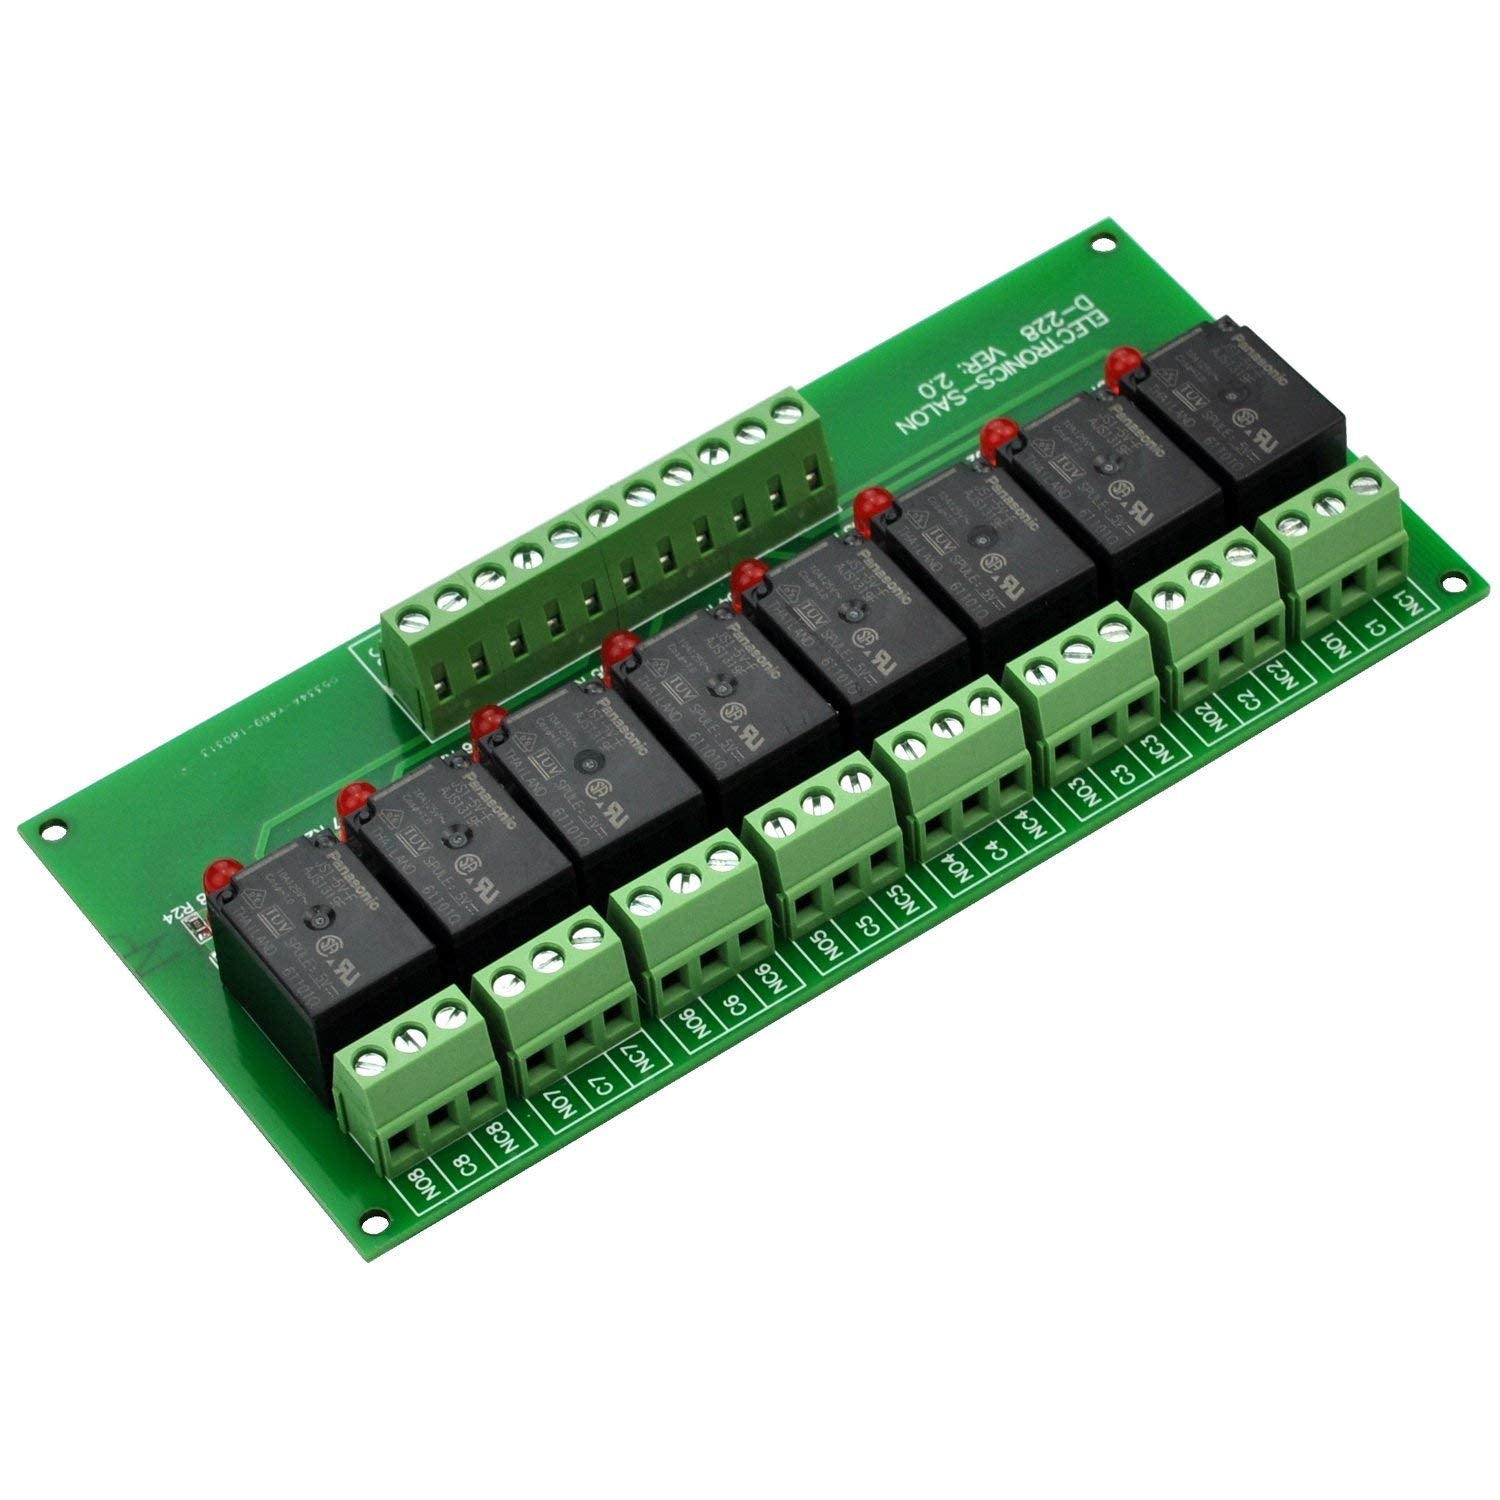 8 Channel 10Amp SPDT Power Relay Module Board (Operating Voltage: DC 5V)